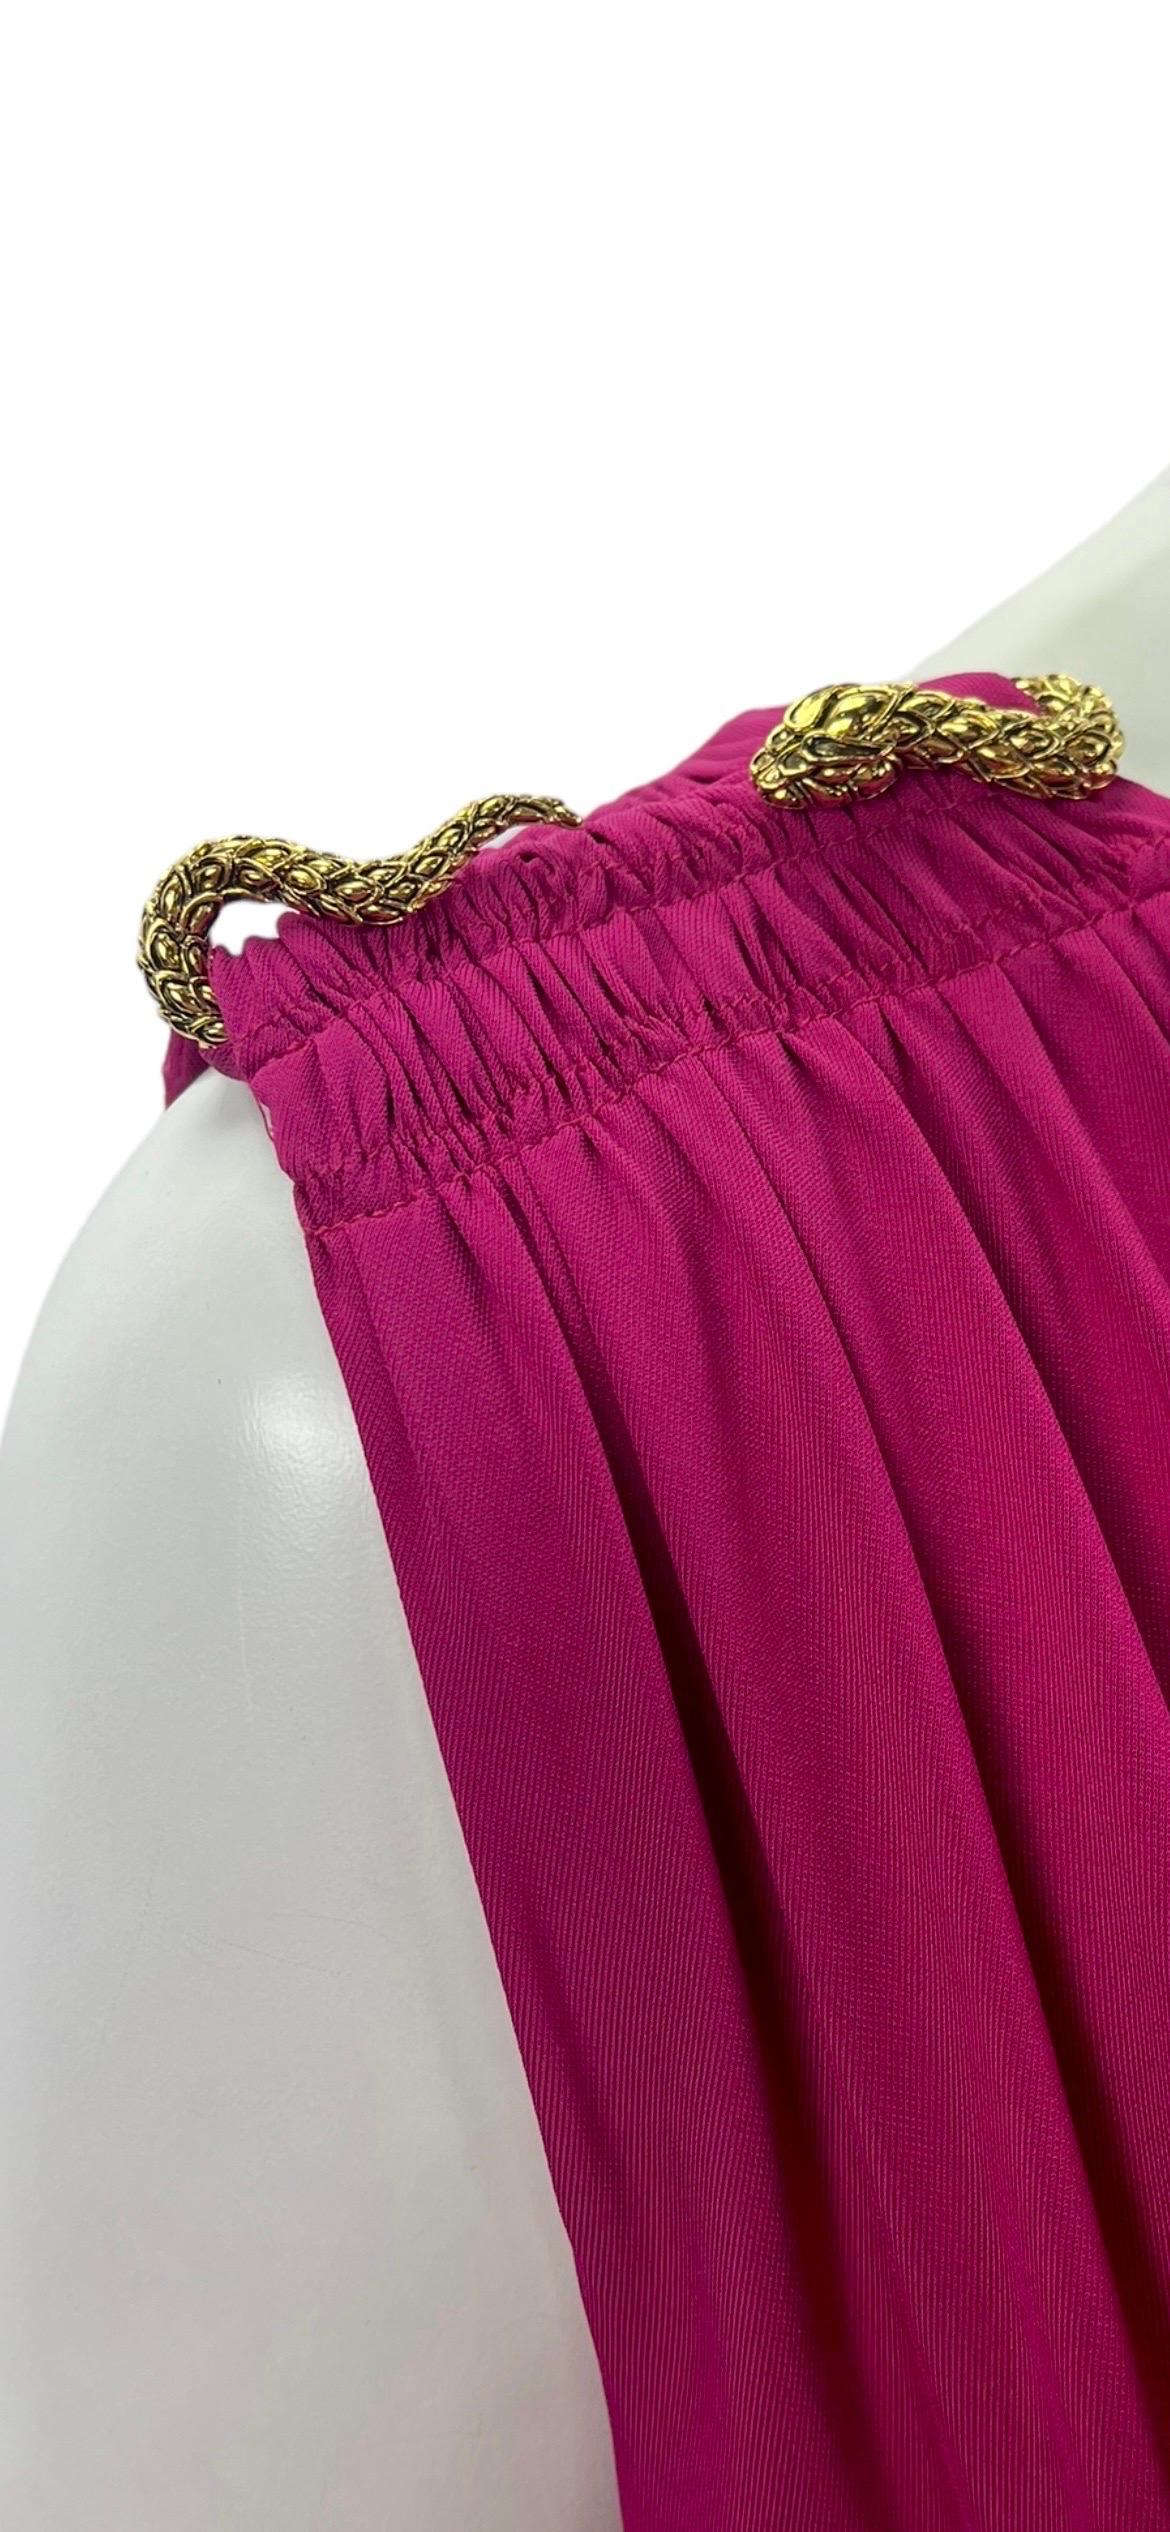 2005 Vintage Roberto Cavalli 
Fuchsia Pink Dress with gold Snake details (removable)
IT Size 44 - US 8
Jersey, stretchy, self-lined, with soft bra inside
Made in Italy
Immaculate condition. Tags attached.

Shown with vintage Gianni Versace chain